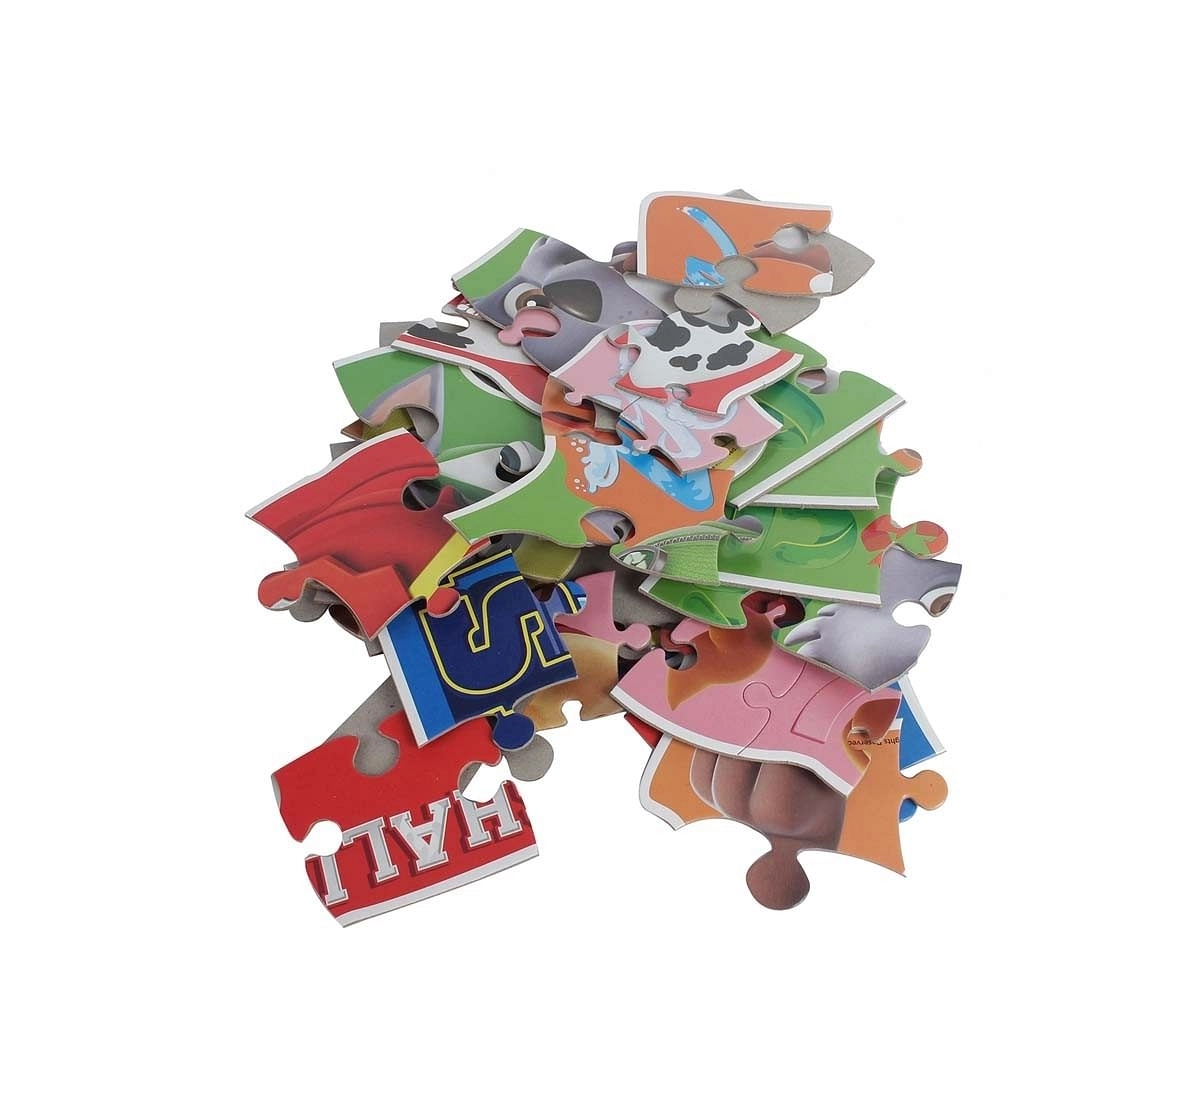 Cardinal Games Paw Patrol 5 Shaped Puzzles Puzzles for Kids Age 3Y+